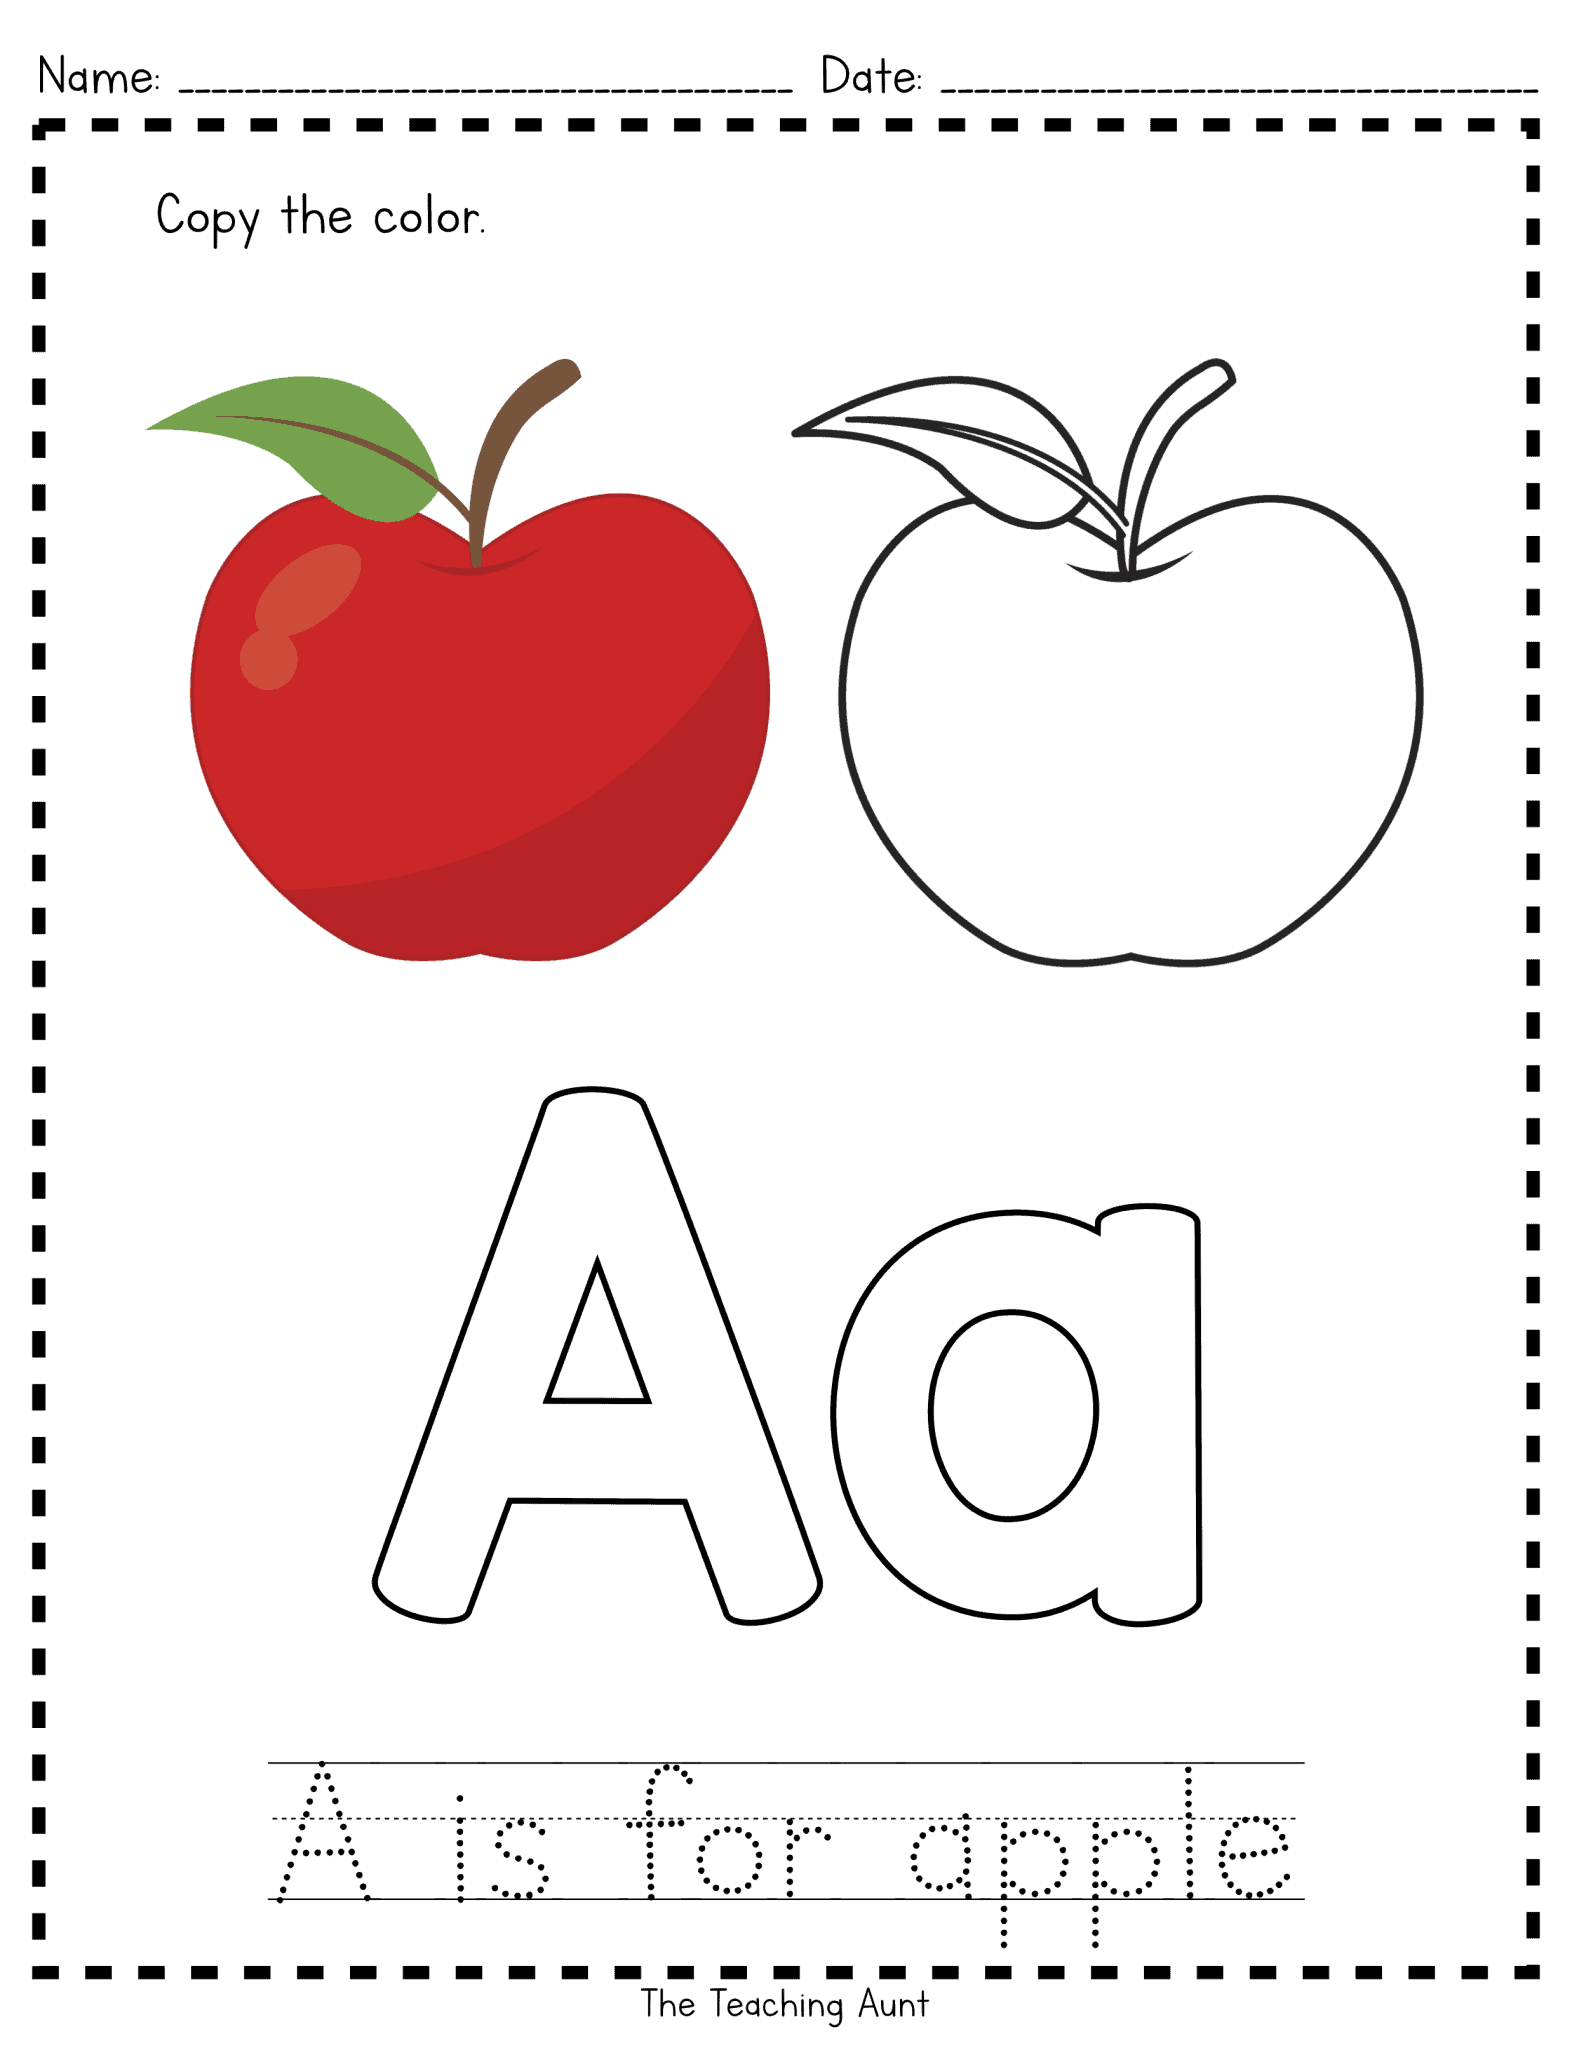 a-is-for-apple-paper-pasting-activity-the-teaching-aunt